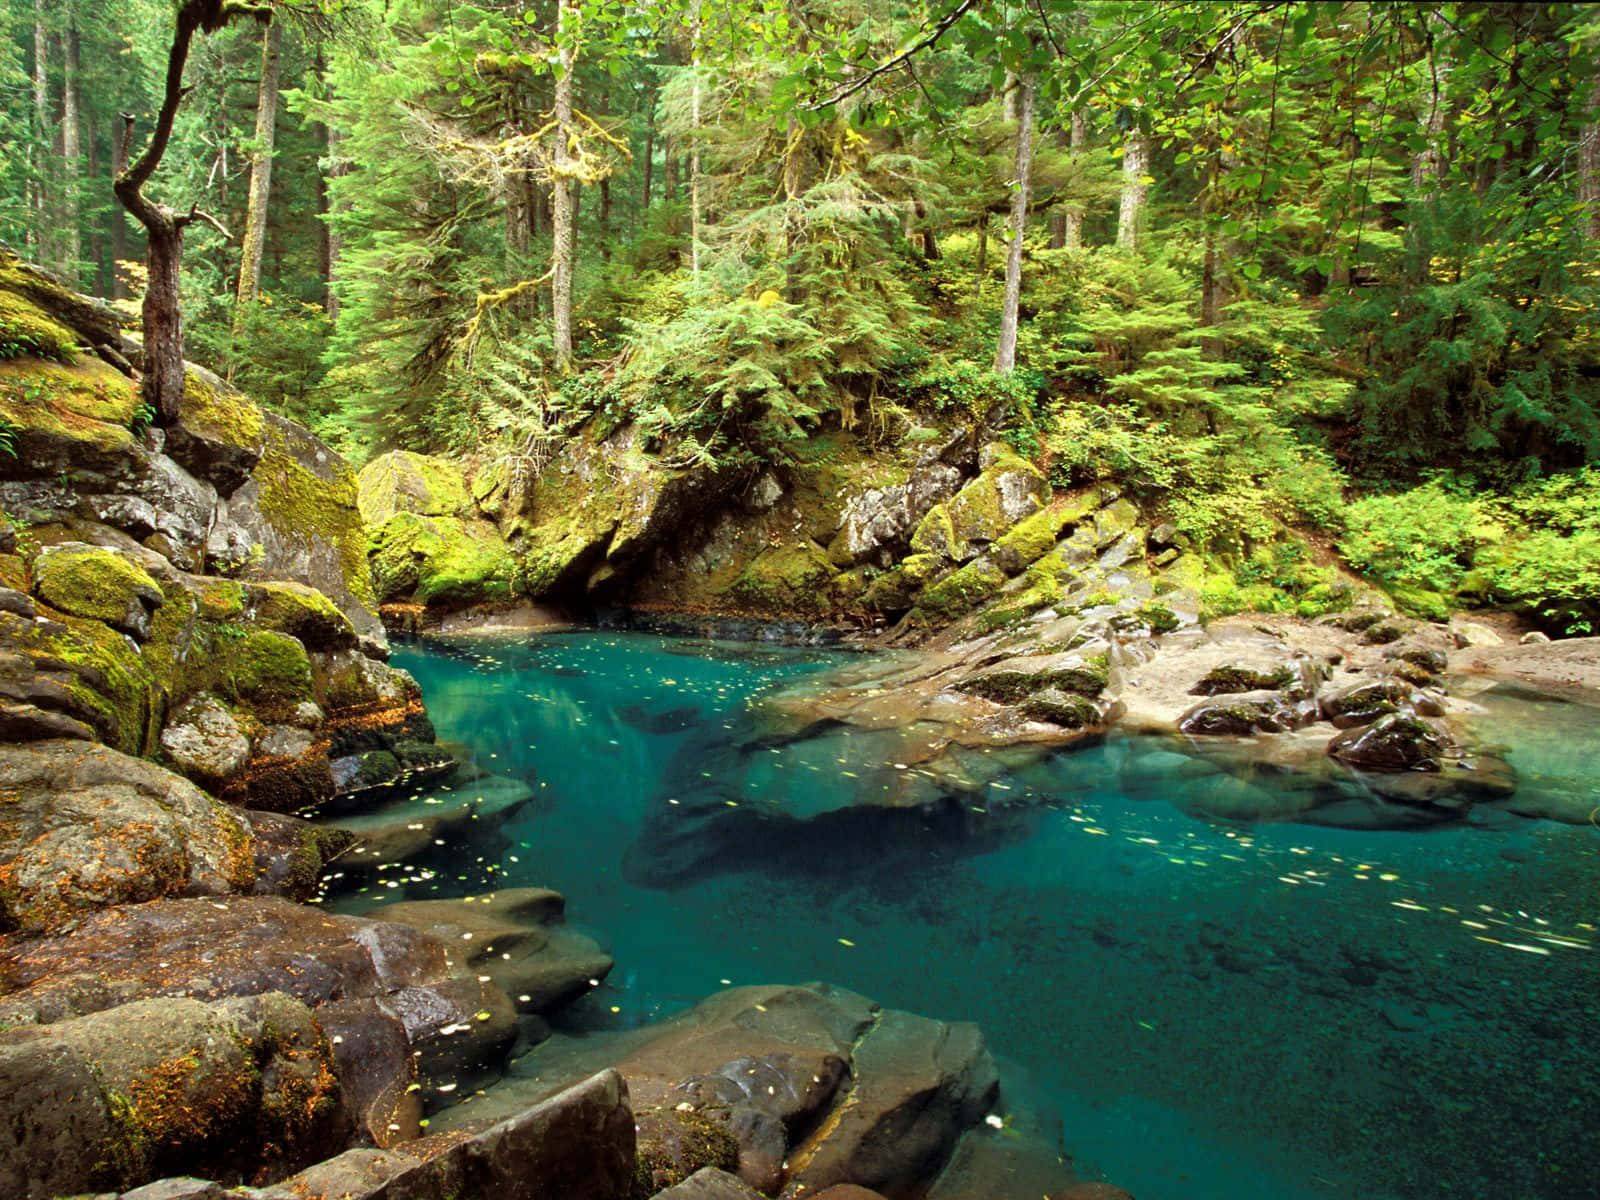 The beauty of Cascade Creek as it meanders through a lush and vibrant forest